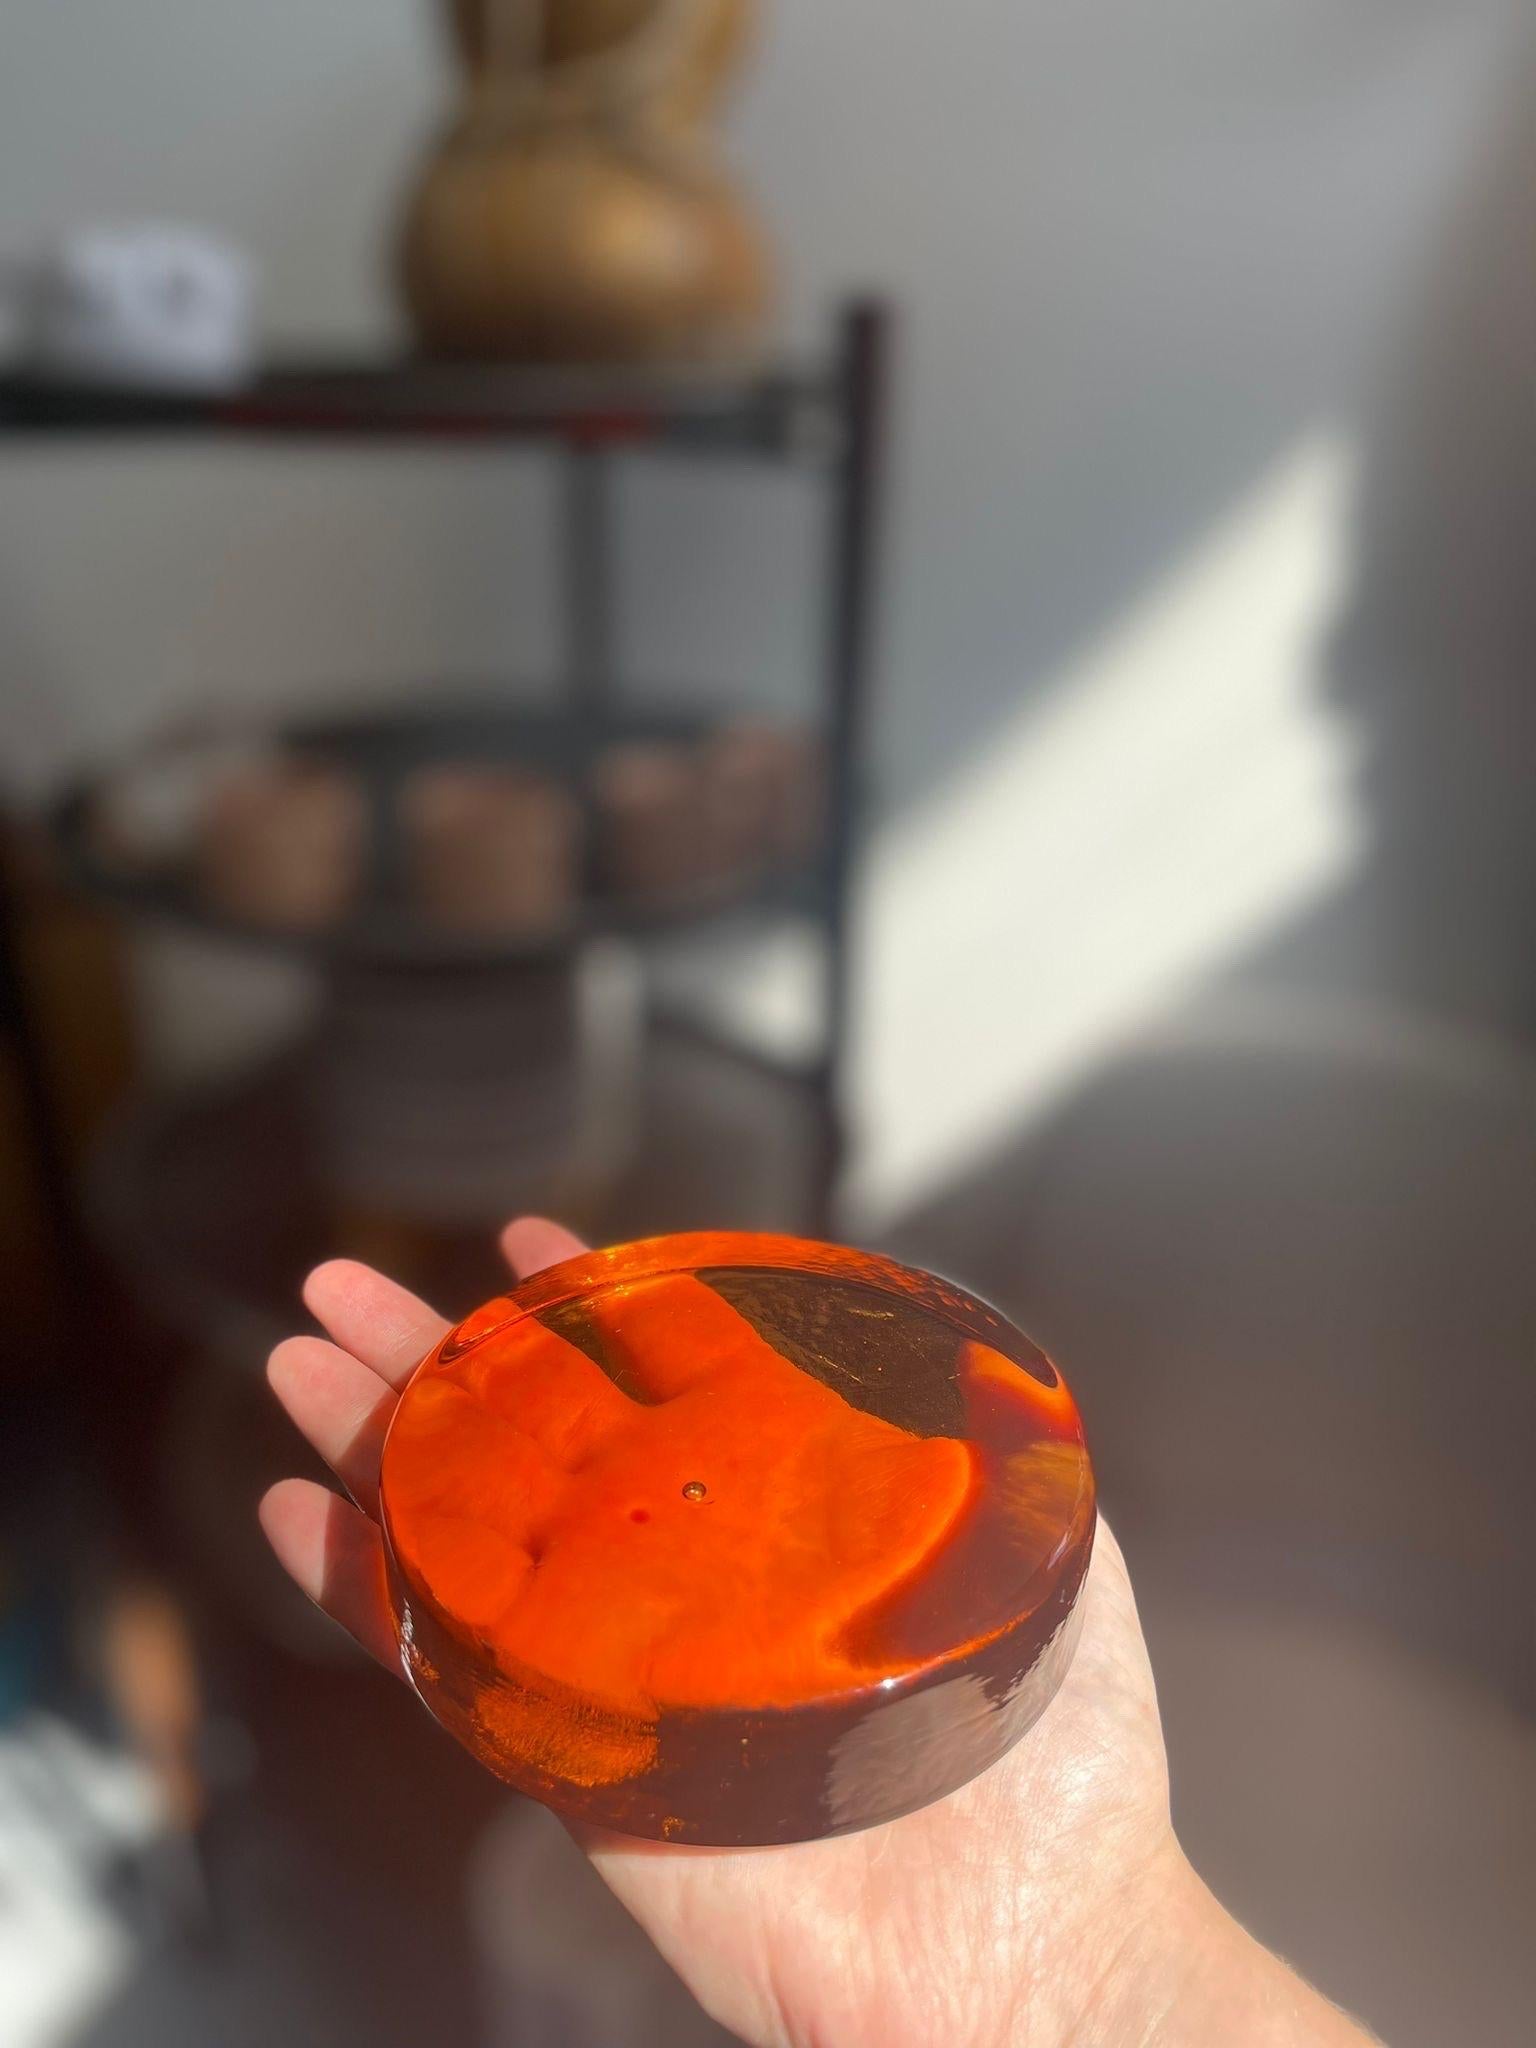 Vintage Paper Weight Amber or Mustard Colored . Mid Century Modern Table Decor. Possibly Glass Material 

Dimensions. 4 Dia ; 1 H